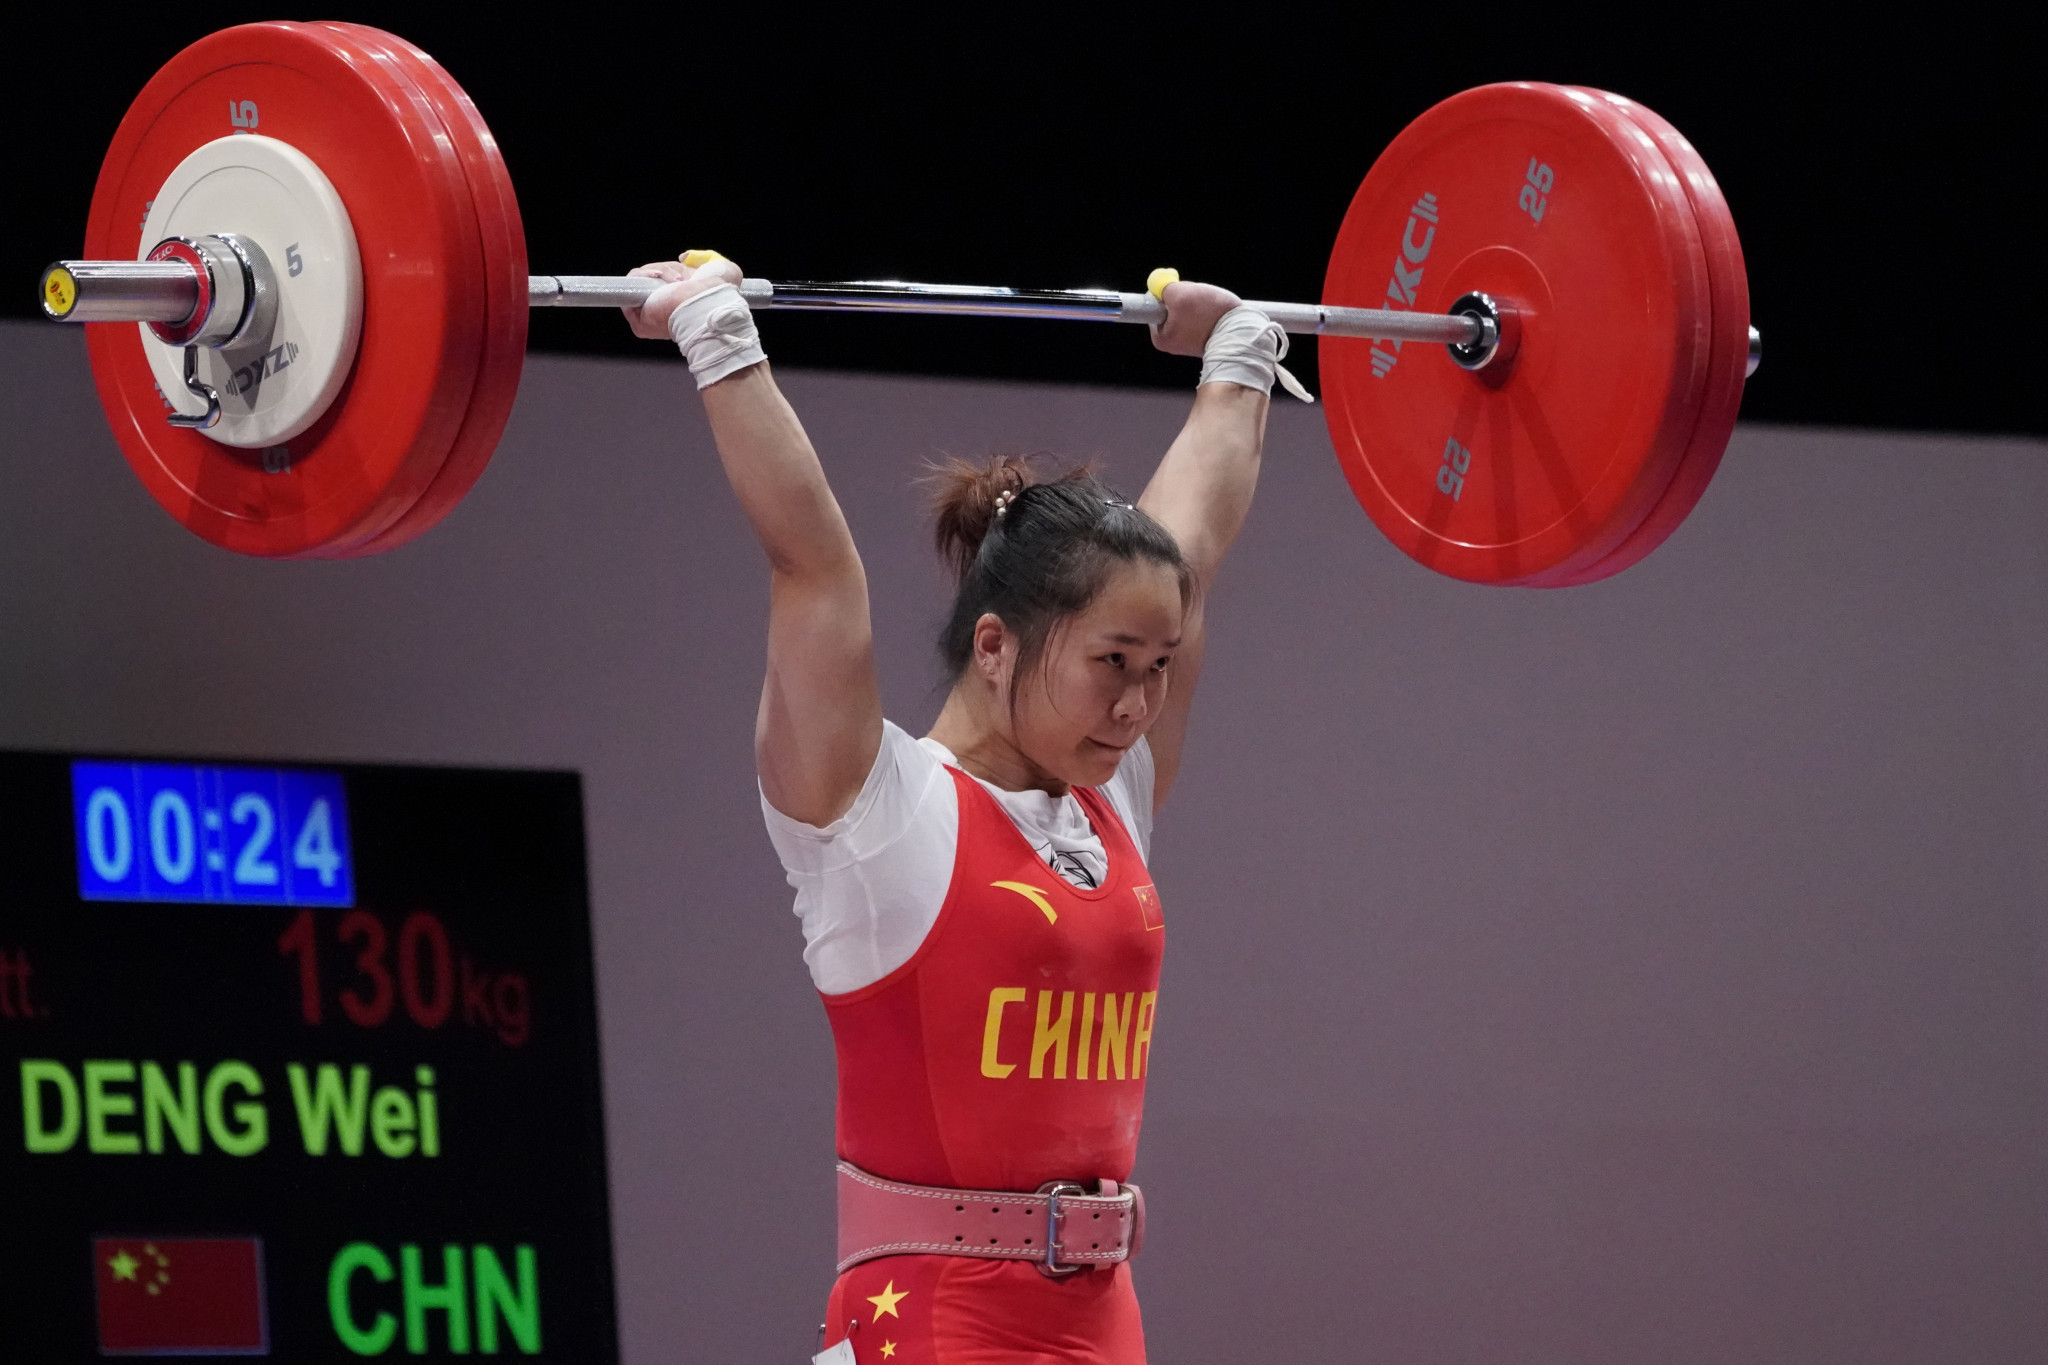 Deng Wei became the first weightlifter, male or female, to pass the 5,000-point mark in Olympic qualification ©Getty Images